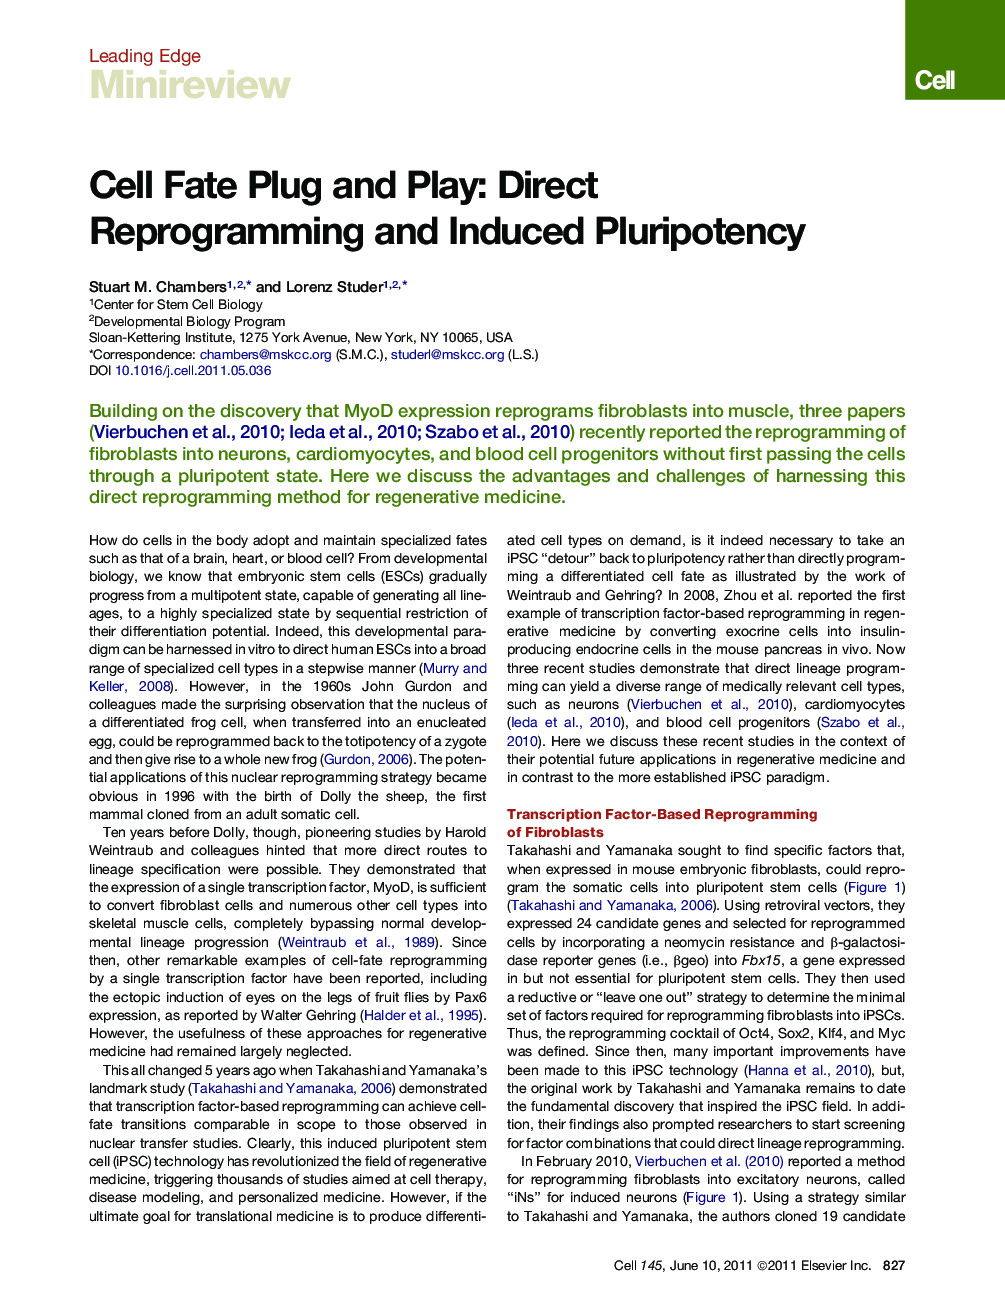 Cell Fate Plug and Play: Direct Reprogramming and Induced Pluripotency